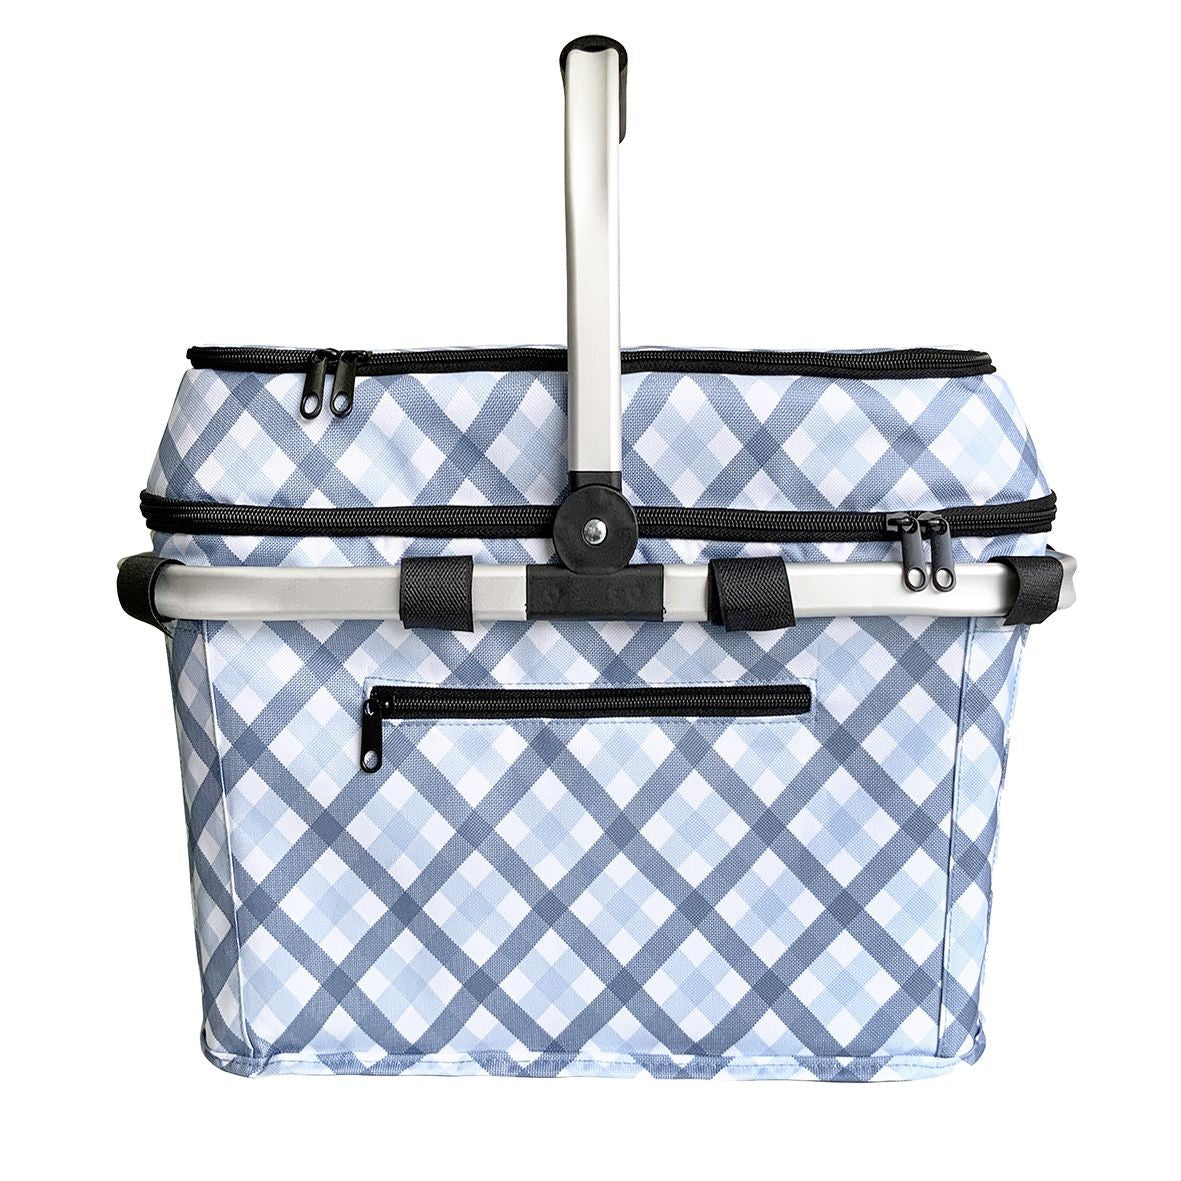 Sachi 4 Person Insulated Picnic Basket (gingham Blue/grey)